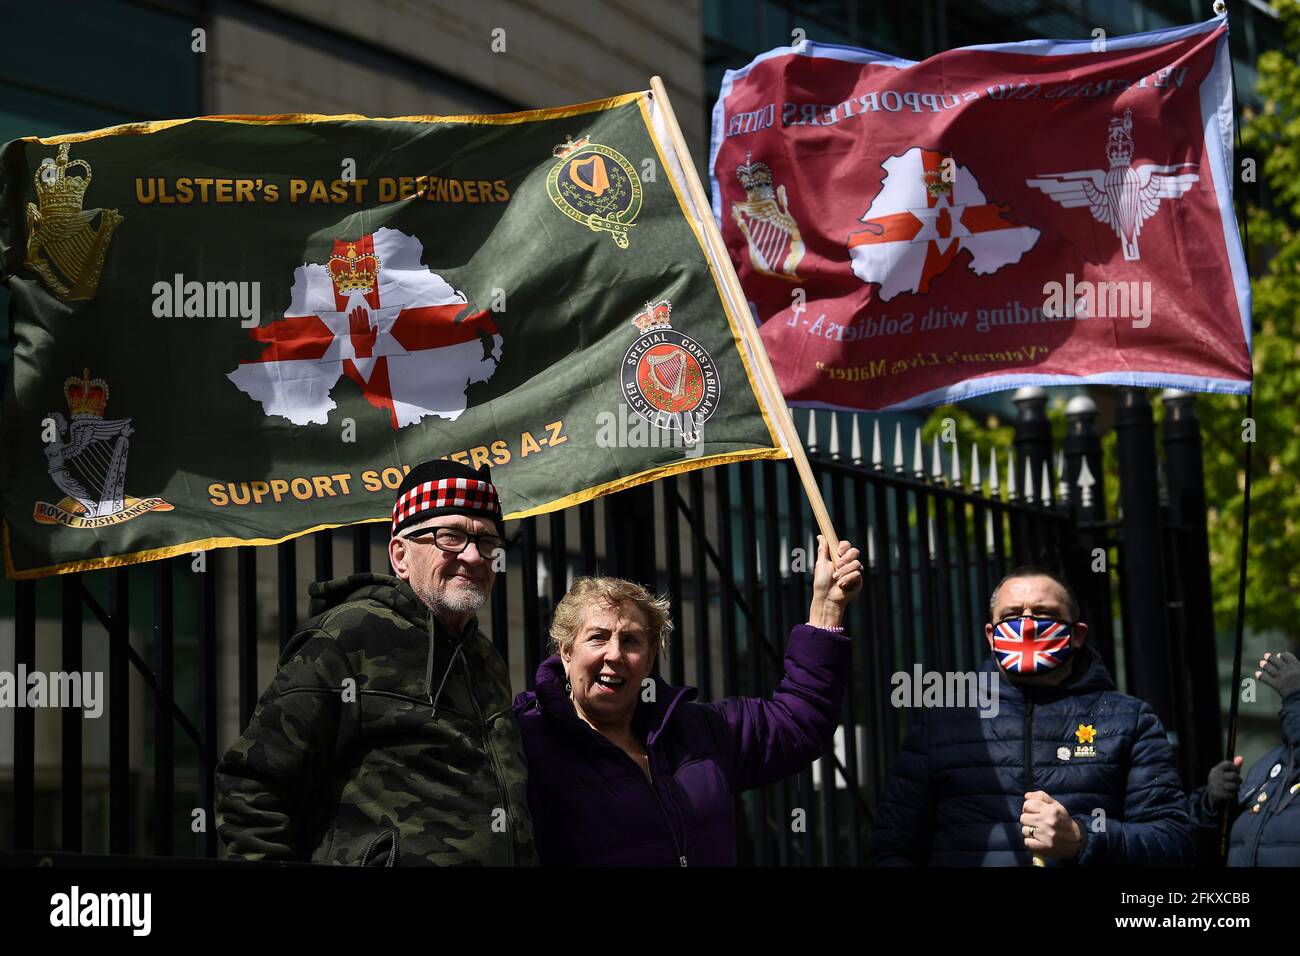 People hold flags outside Laganside Courts during the trial into the 1972 killing of official IRA member Joe McCann, in Belfast, Northern Ireland, May 4, 2021. REUTERS/Clodagh Kilcoyne Stock Photo